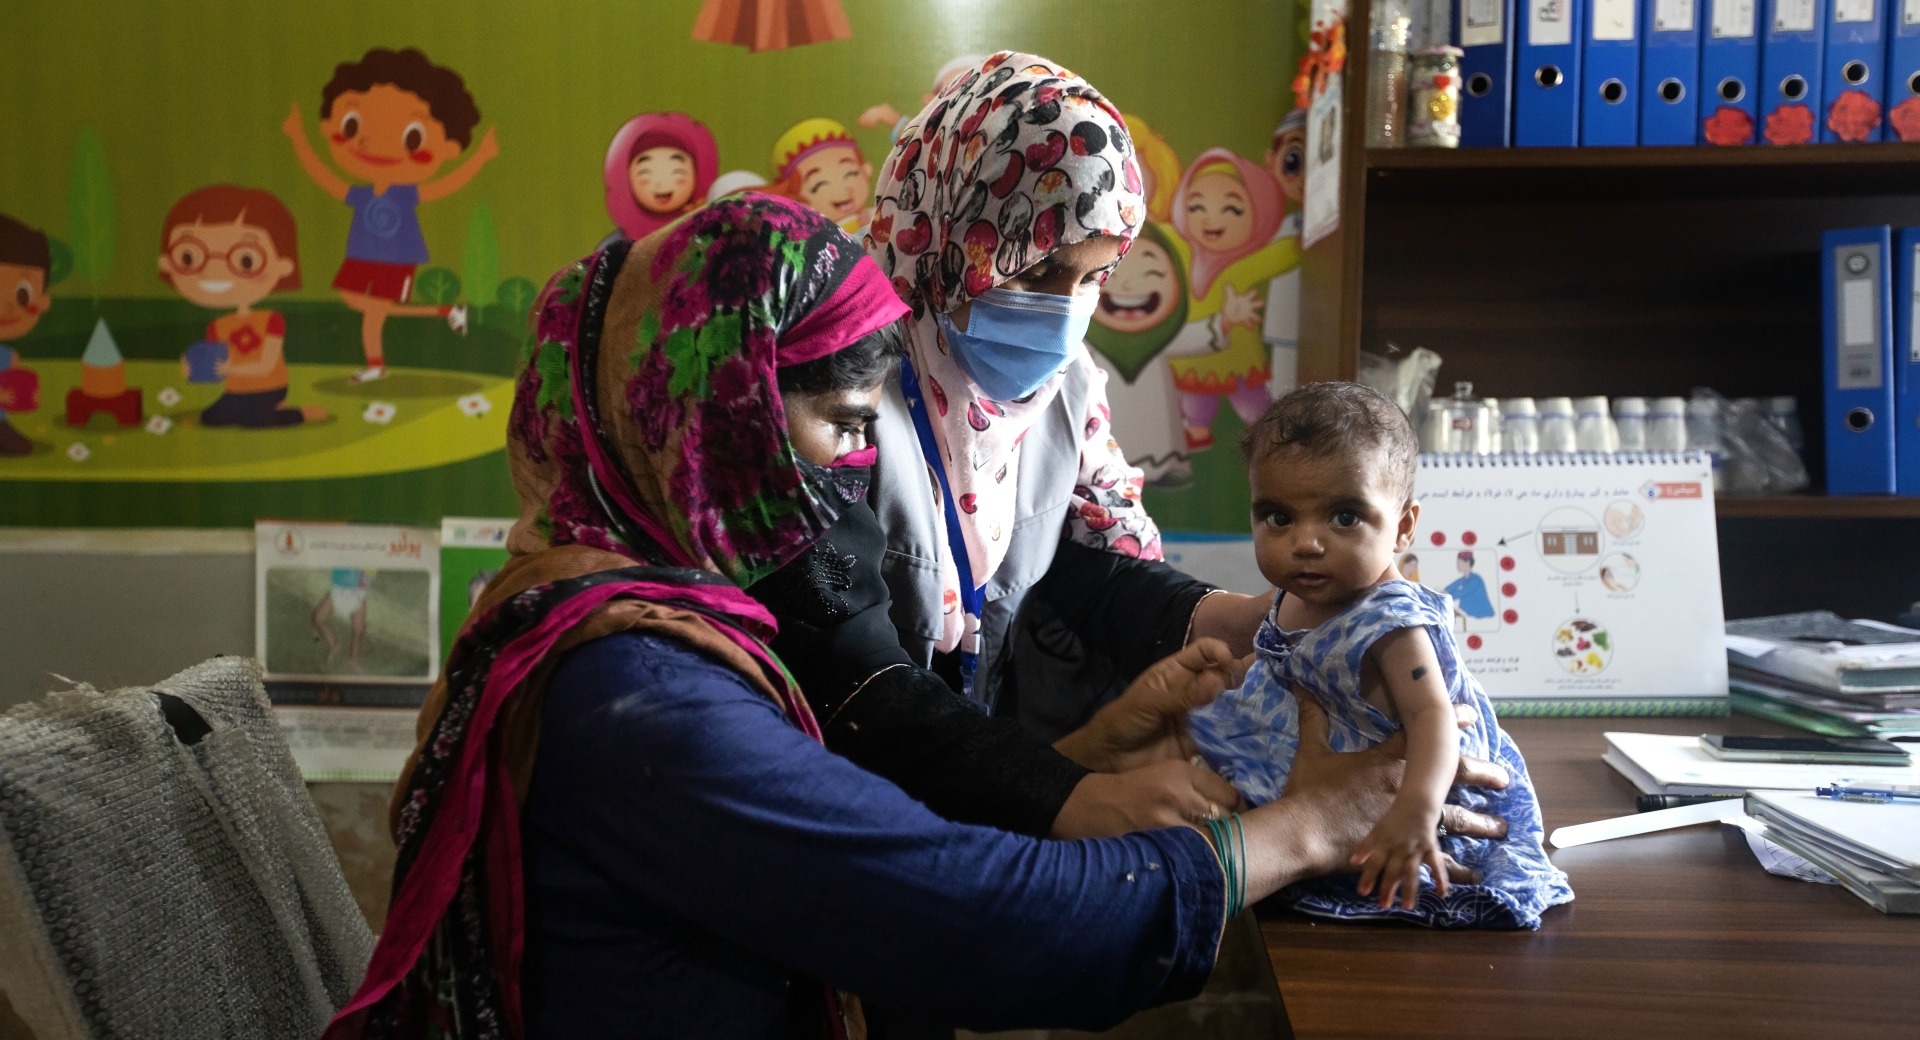 Dr. Zarina Lashari, a nutrition assistant, consults with a mother and child at an outpatient treatment center in Sindh, Pakistan.